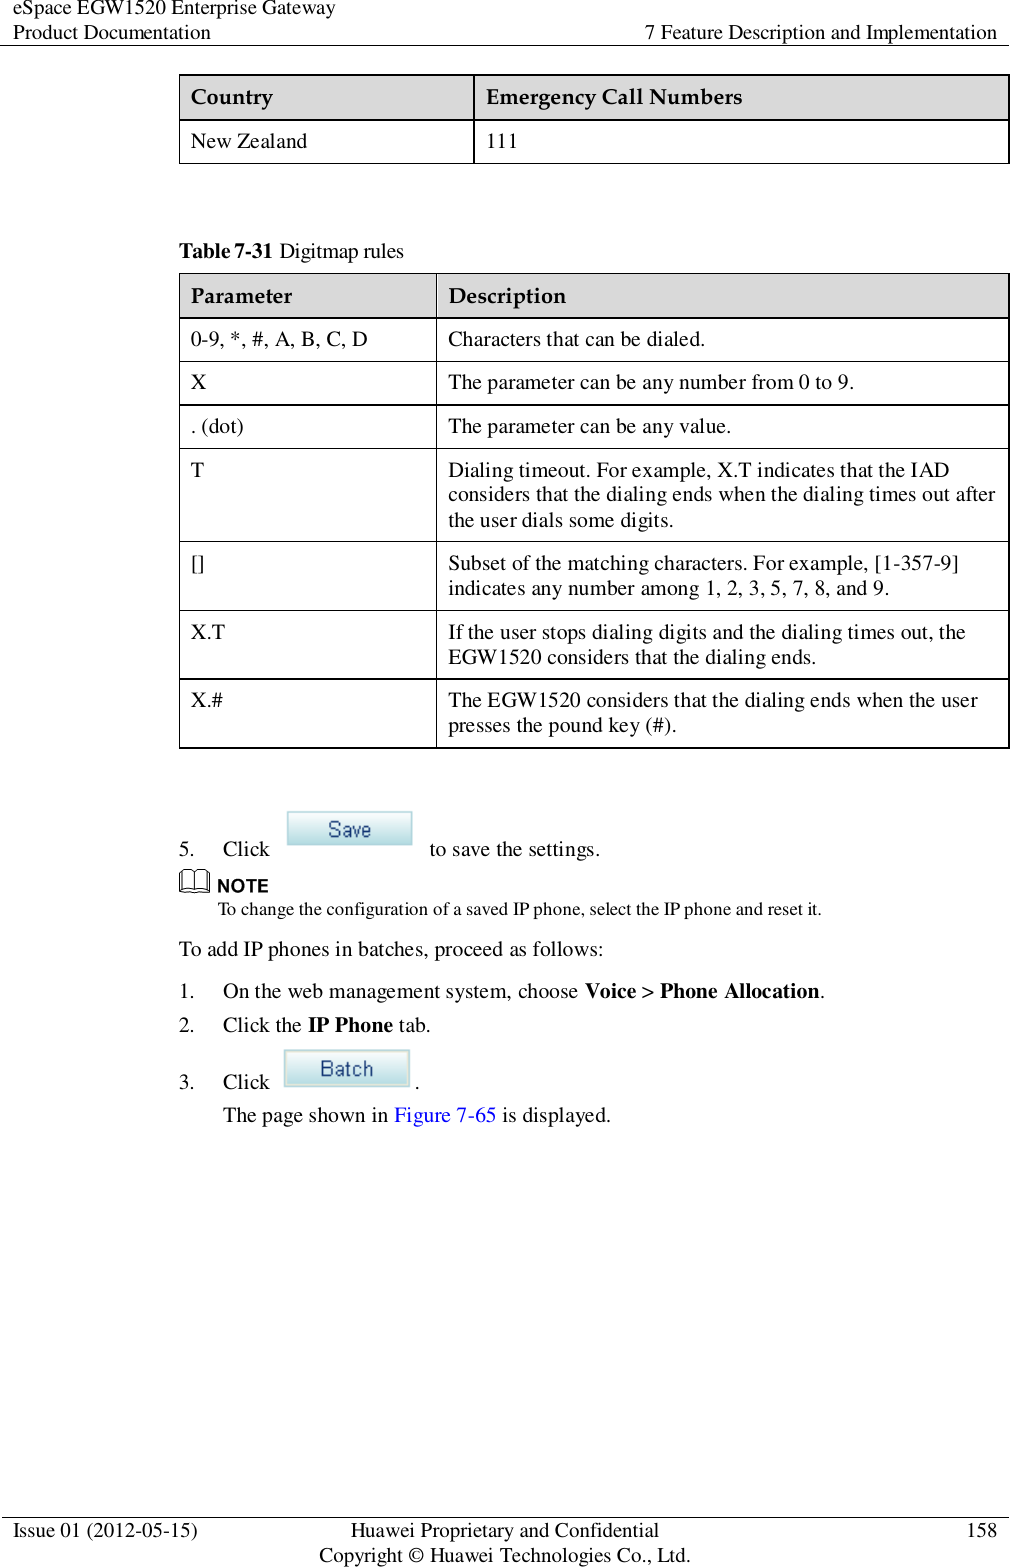 eSpace EGW1520 Enterprise Gateway Product Documentation 7 Feature Description and Implementation  Issue 01 (2012-05-15) Huawei Proprietary and Confidential                                     Copyright © Huawei Technologies Co., Ltd. 158  Country Emergency Call Numbers New Zealand 111  Table 7-31 Digitmap rules Parameter Description 0-9, *, #, A, B, C, D Characters that can be dialed. X The parameter can be any number from 0 to 9. . (dot) The parameter can be any value. T Dialing timeout. For example, X.T indicates that the IAD considers that the dialing ends when the dialing times out after the user dials some digits. [] Subset of the matching characters. For example, [1-357-9] indicates any number among 1, 2, 3, 5, 7, 8, and 9. X.T If the user stops dialing digits and the dialing times out, the EGW1520 considers that the dialing ends. X.# The EGW1520 considers that the dialing ends when the user presses the pound key (#).  5. Click    to save the settings.  To change the configuration of a saved IP phone, select the IP phone and reset it. To add IP phones in batches, proceed as follows: 1. On the web management system, choose Voice &gt; Phone Allocation. 2. Click the IP Phone tab. 3. Click  . The page shown in Figure 7-65 is displayed. 